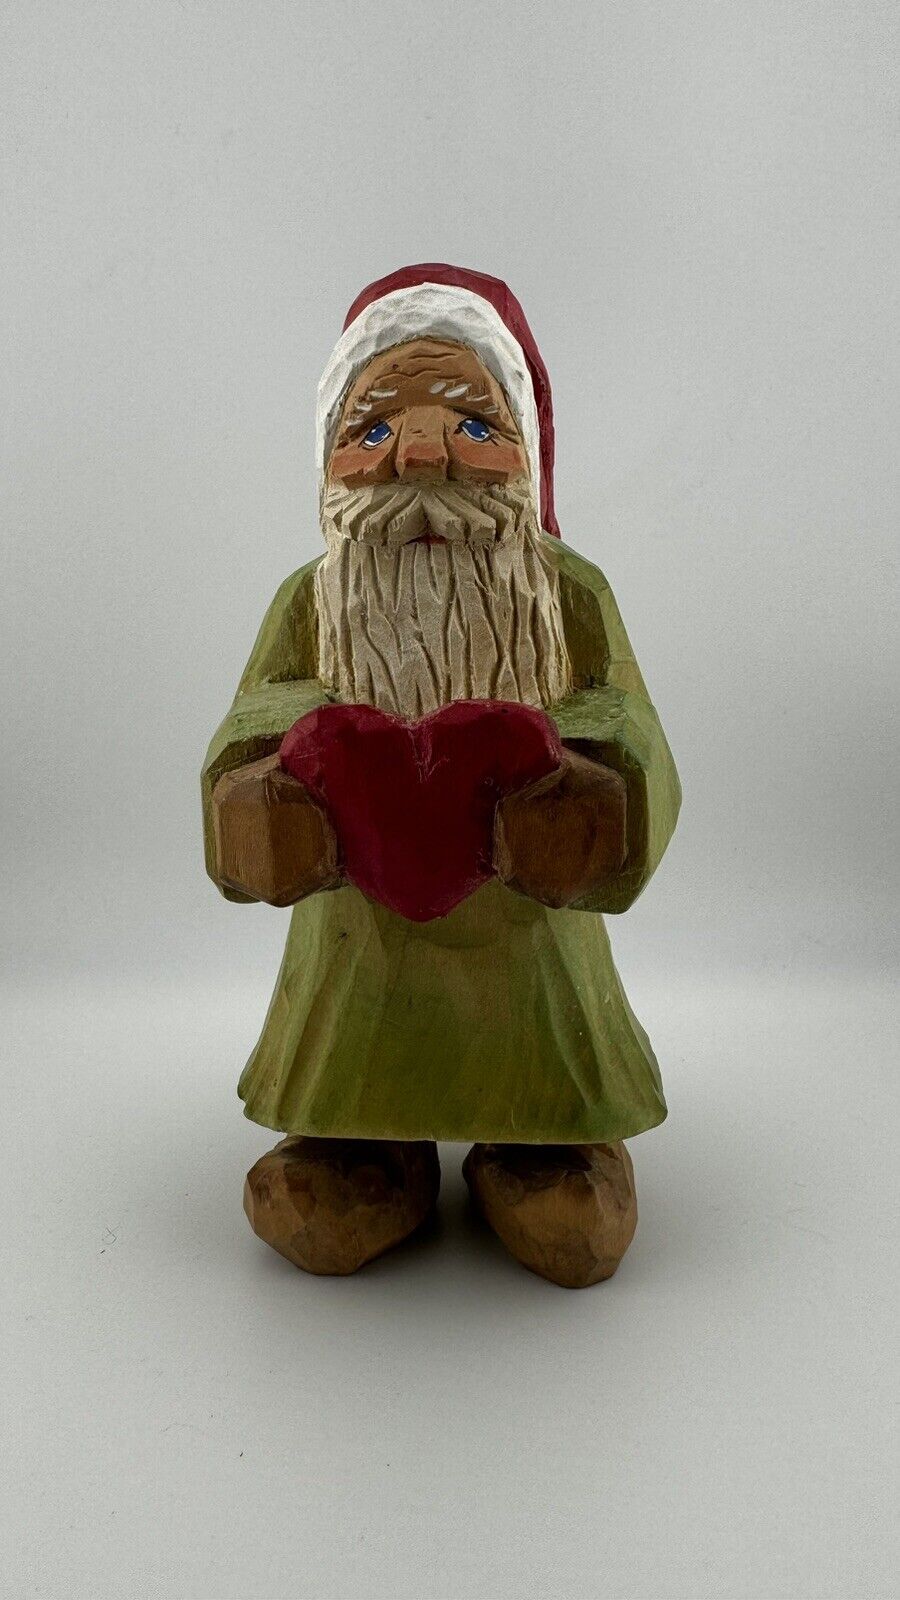 Hand-Carved Santa Claus Figurine with Heart, Signed by Artist